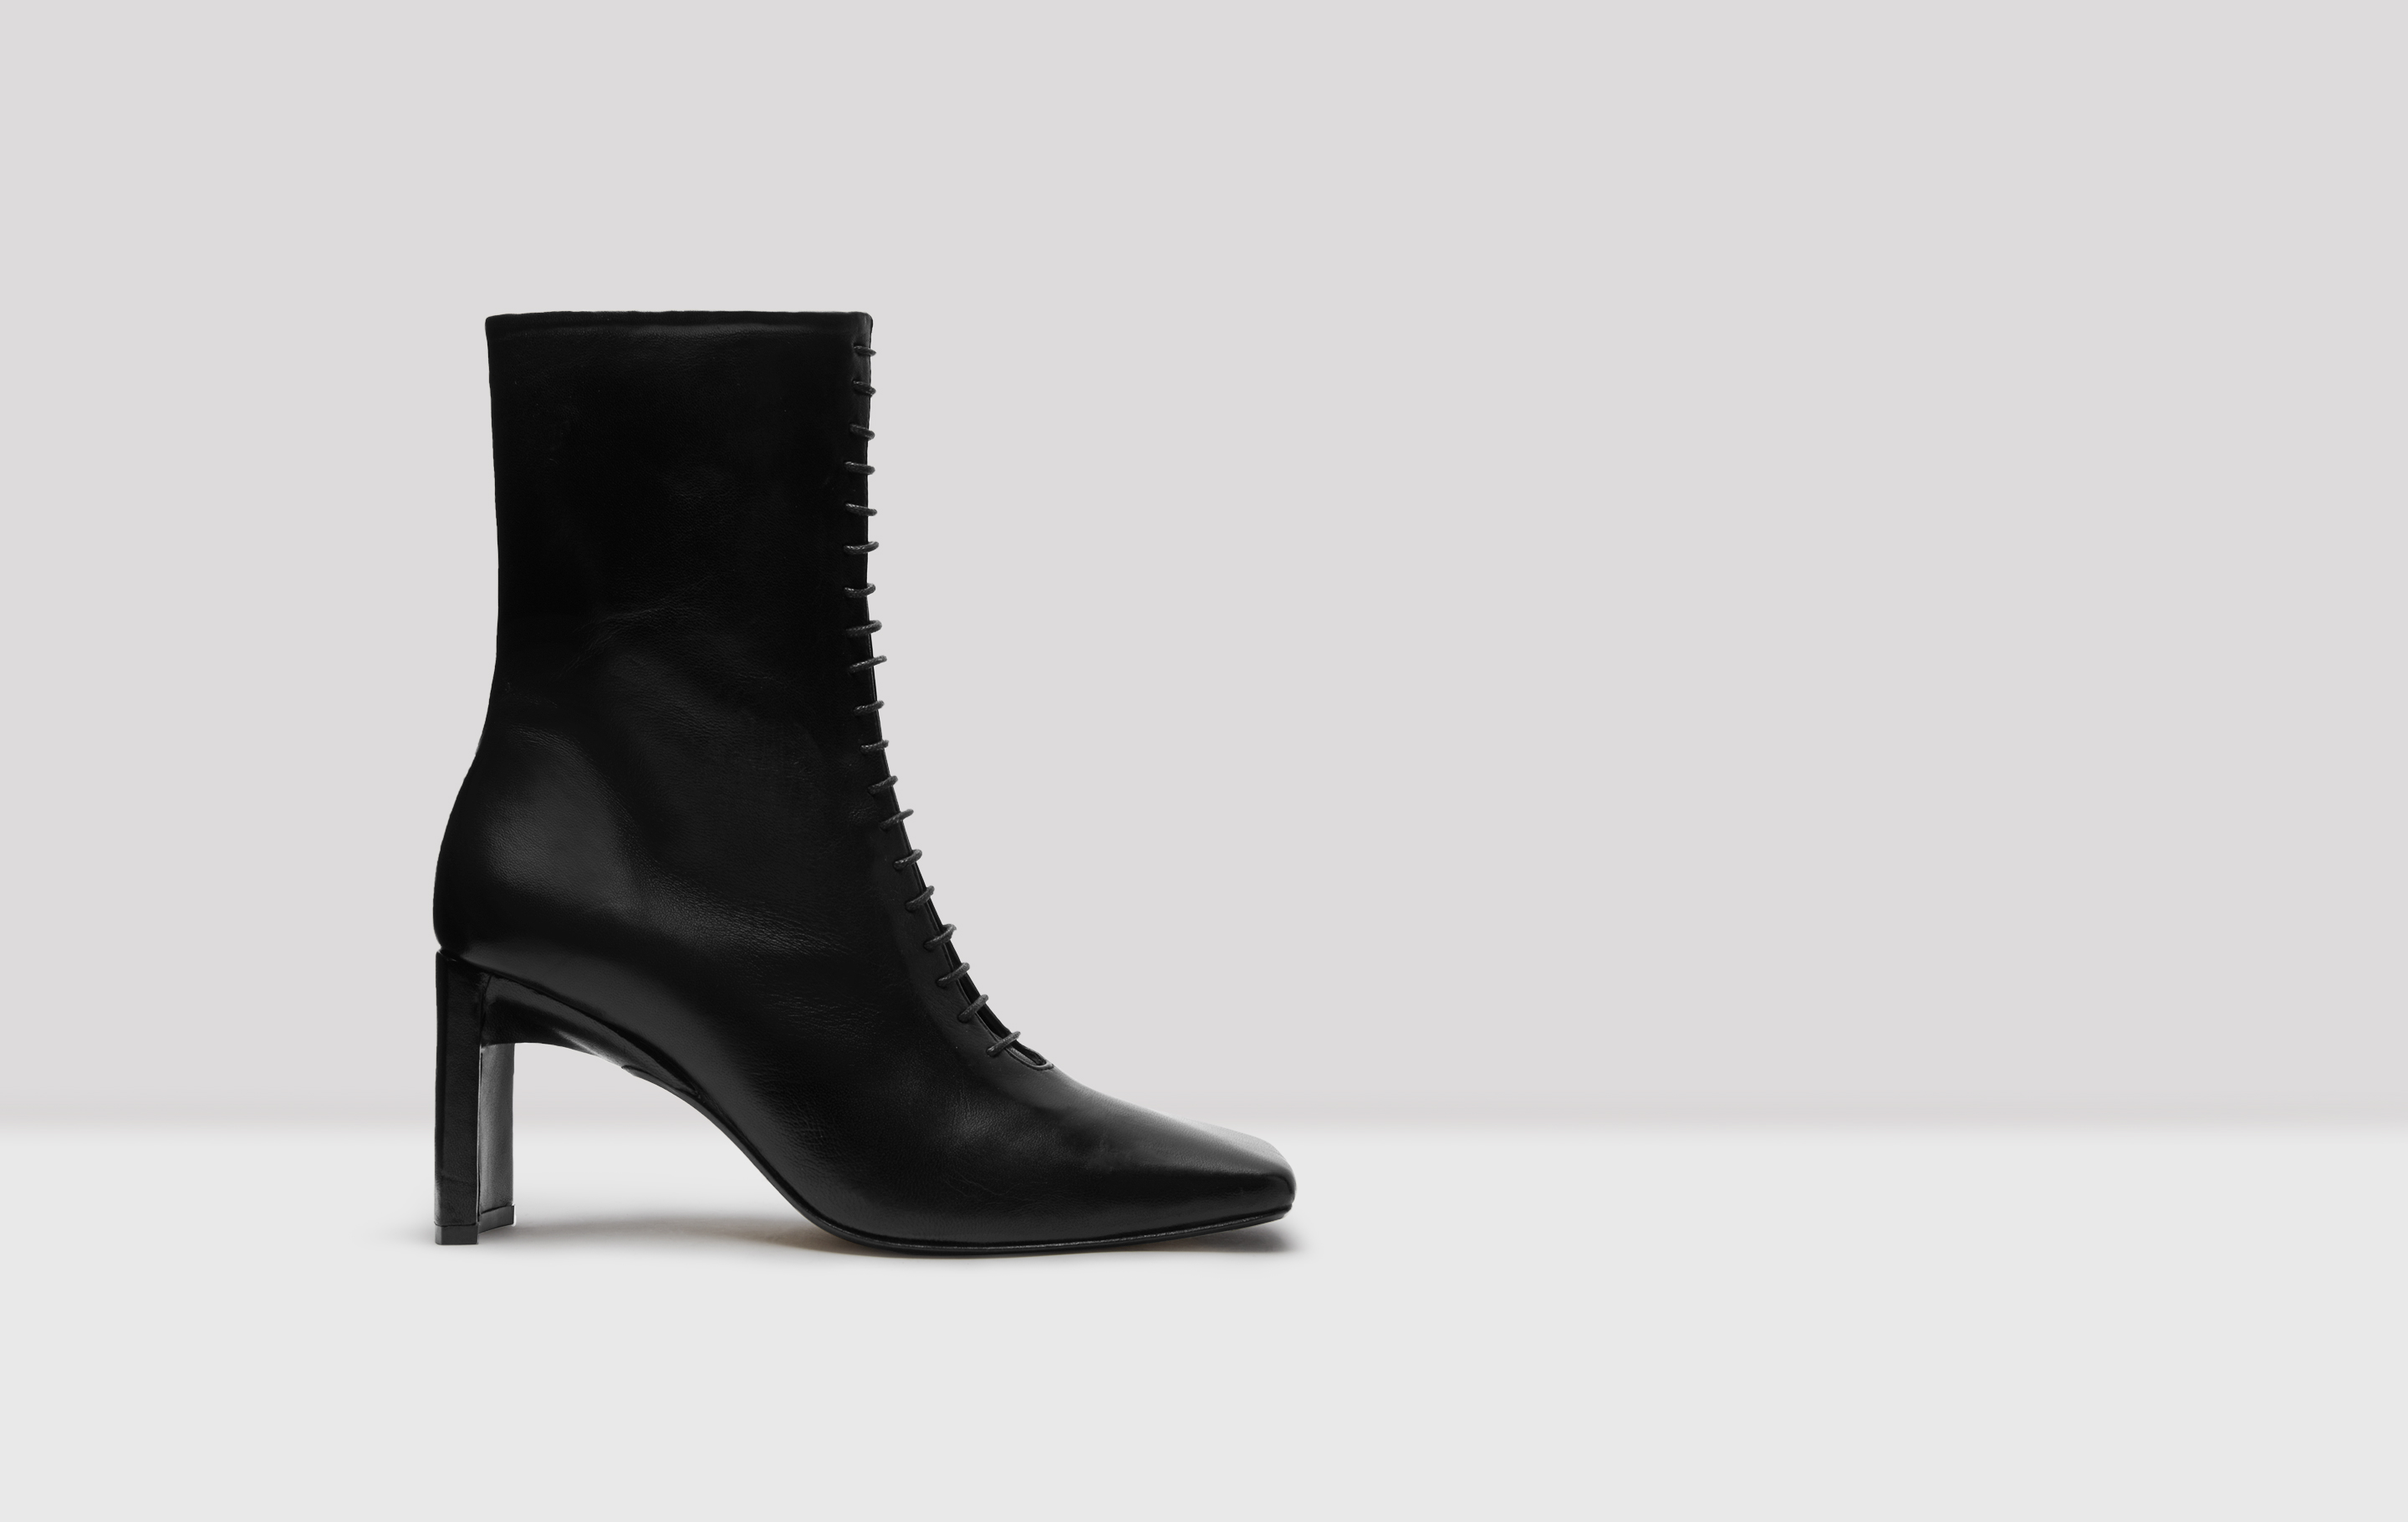 Ania Black Leather Boots // Laced Up High Heeled Boots